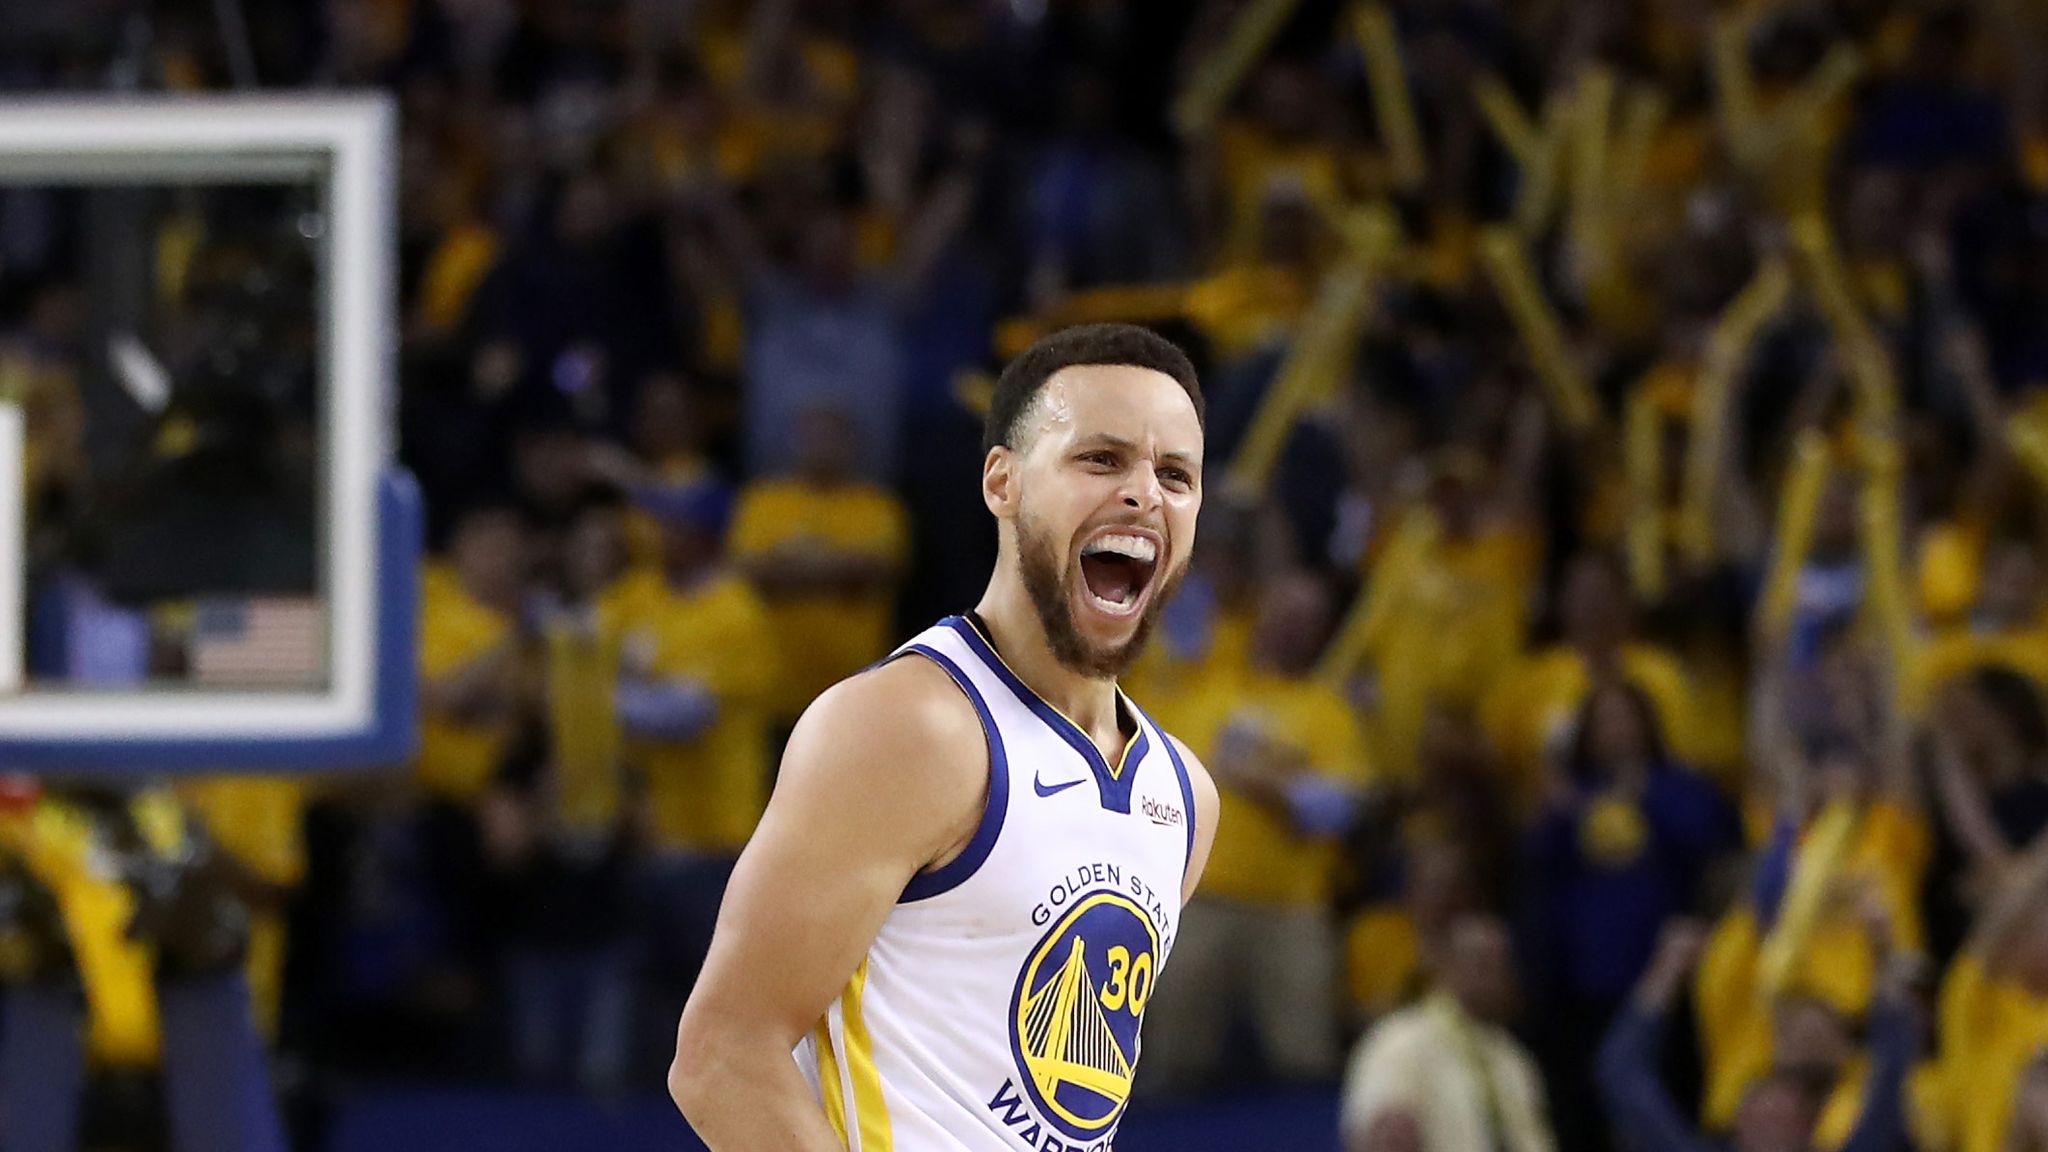 Golden State Warriors Christmas wish-list: Stephen Curry